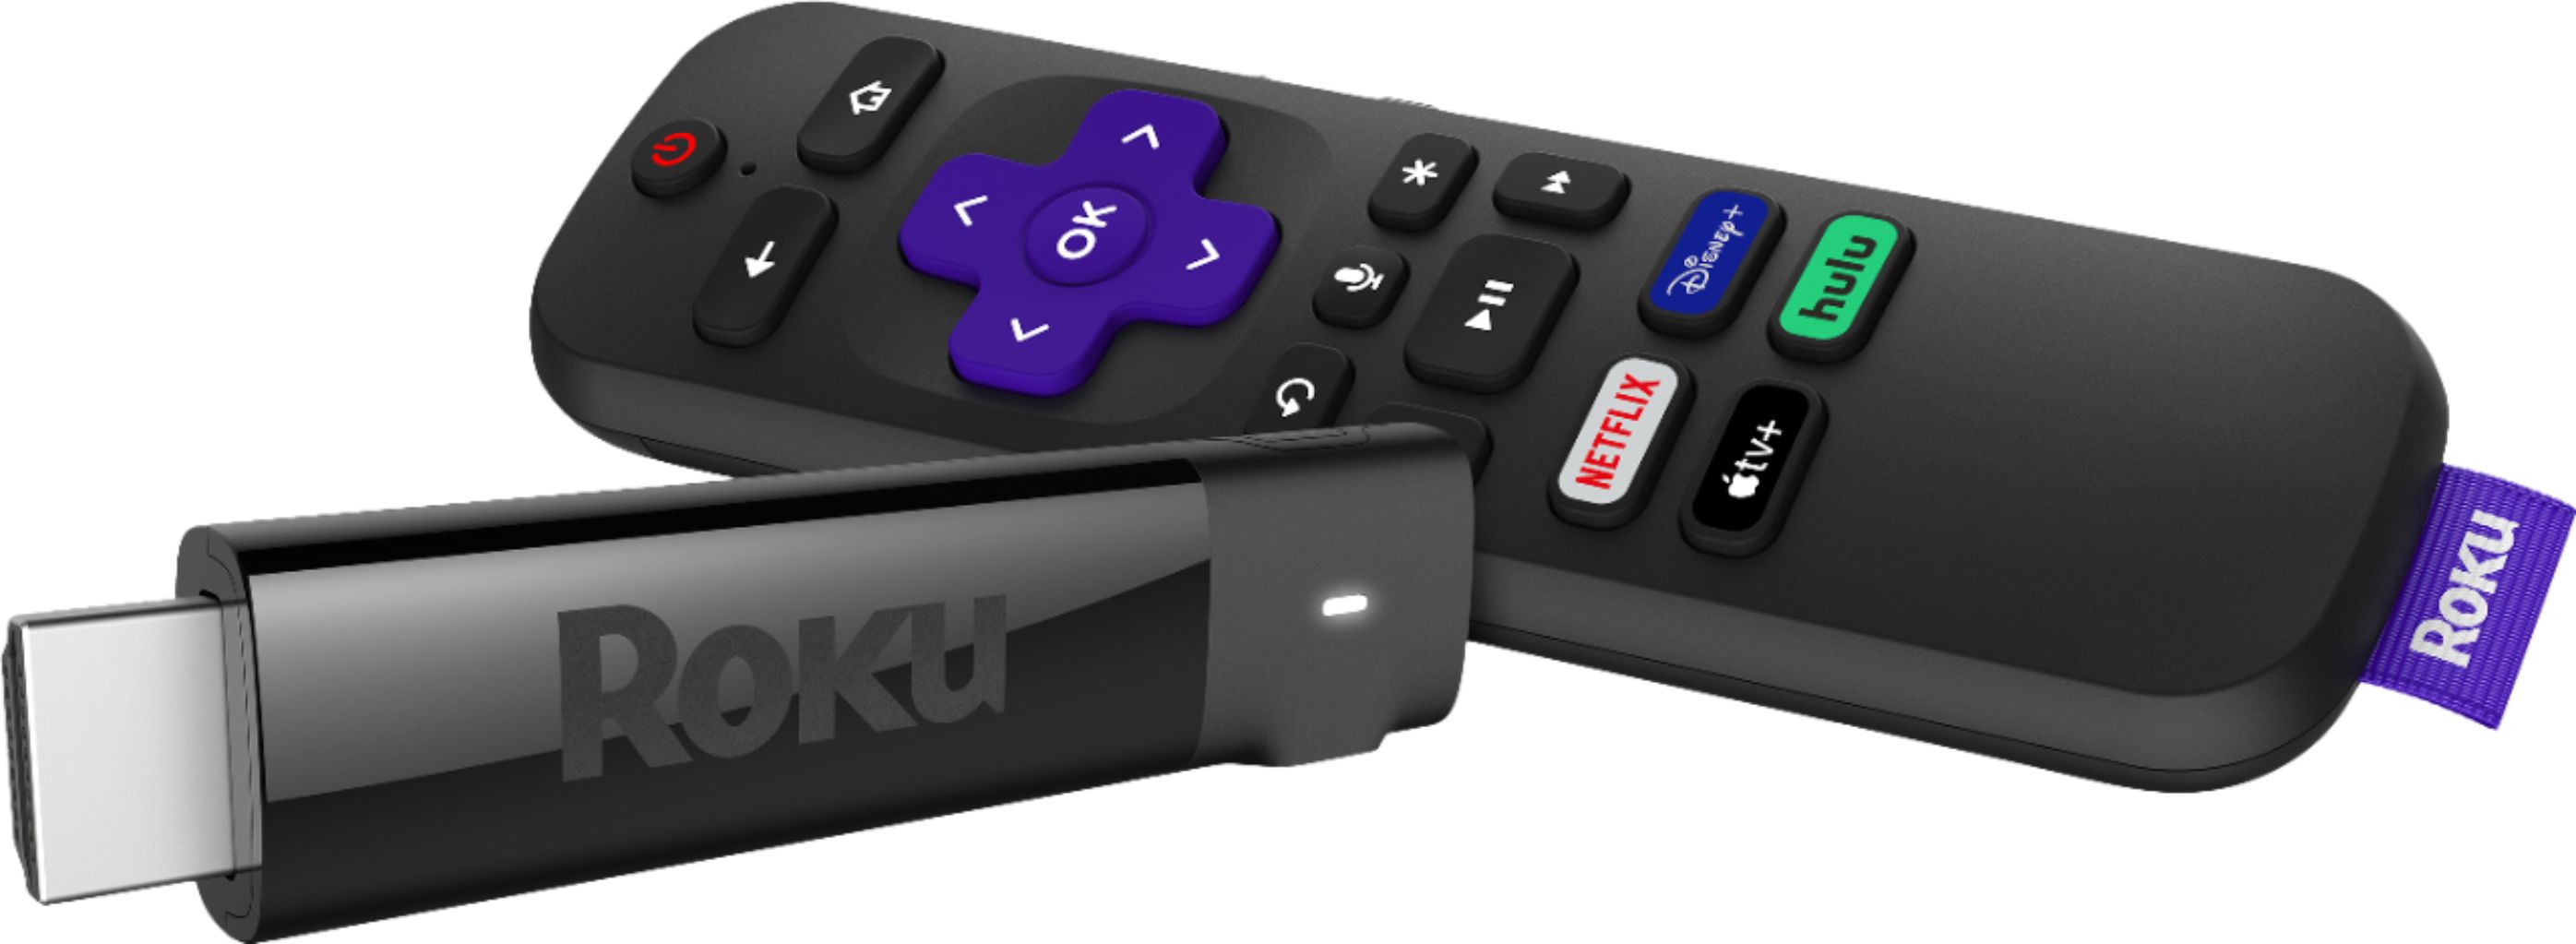 Roku Streaming Stick+ 4K Streaming Media Player with Voice Remote with TV  Controls Black 3810R - Best Buy